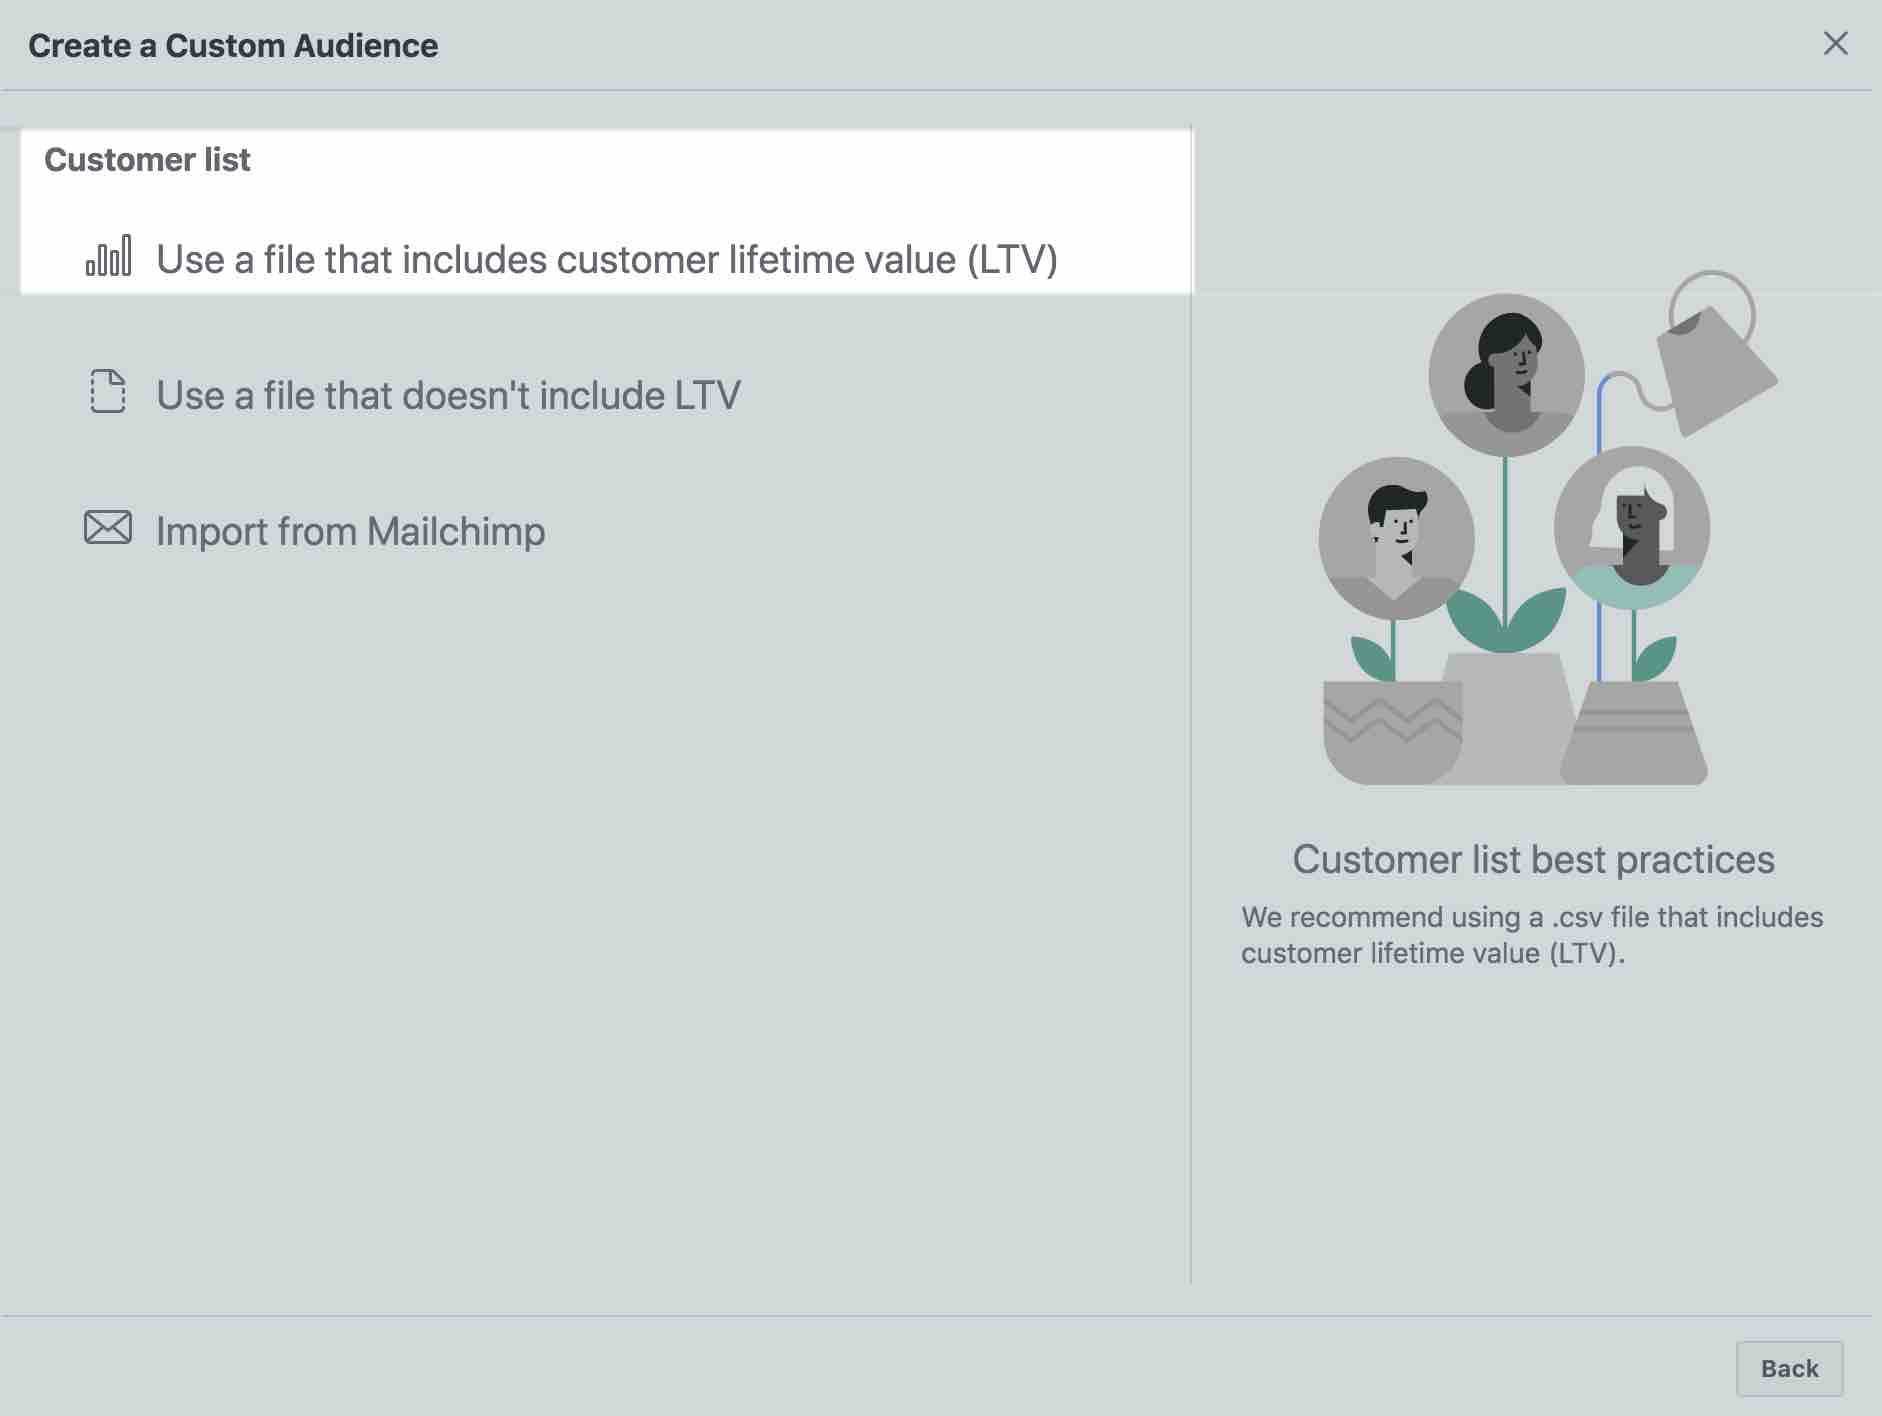 Create a custom audience page in Facebook with Use a file that includes customer lifetime value highlighted in white